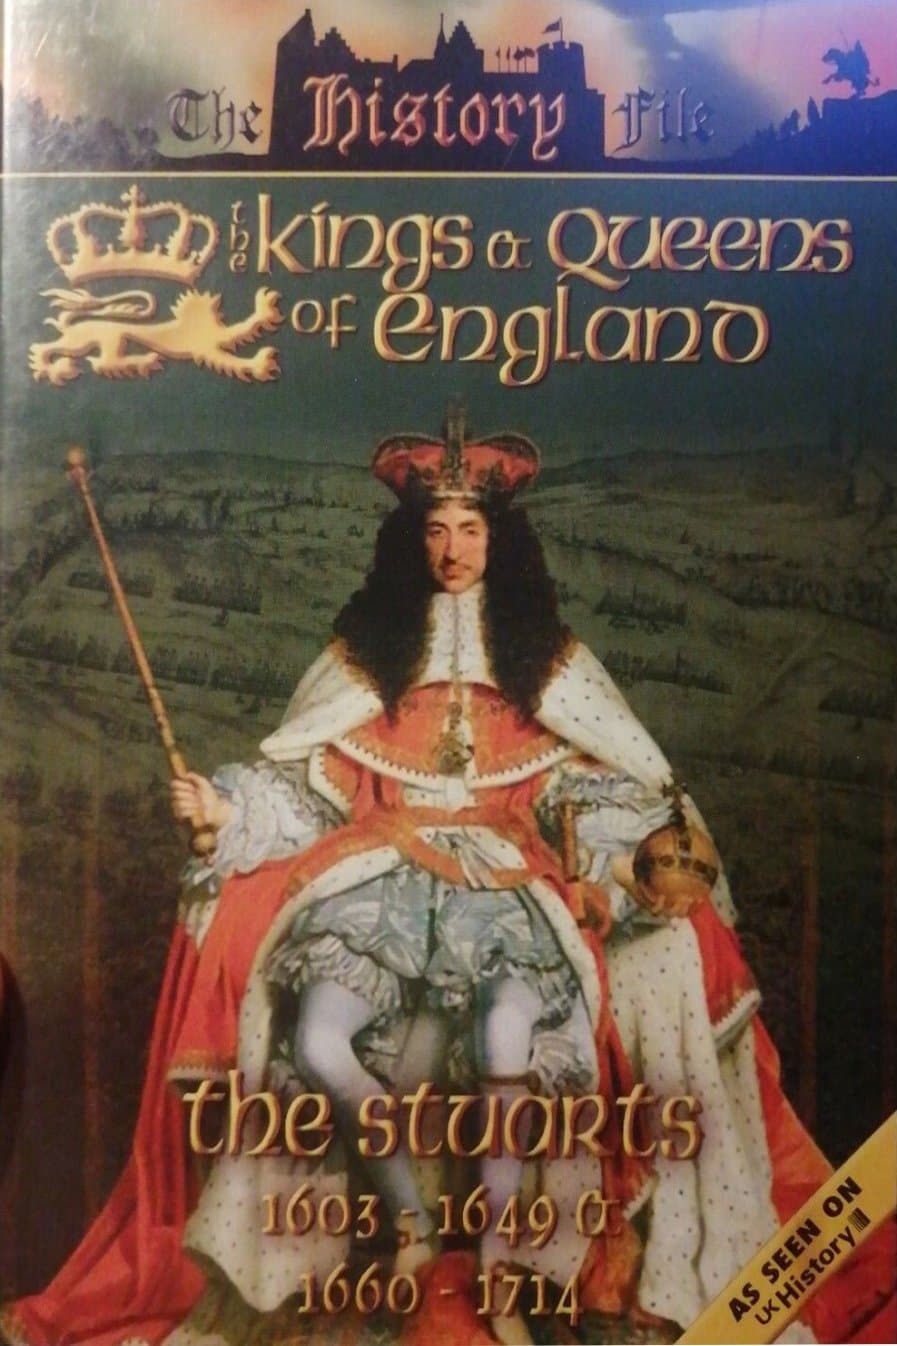 The Kings and Queens of England - The Stuarts